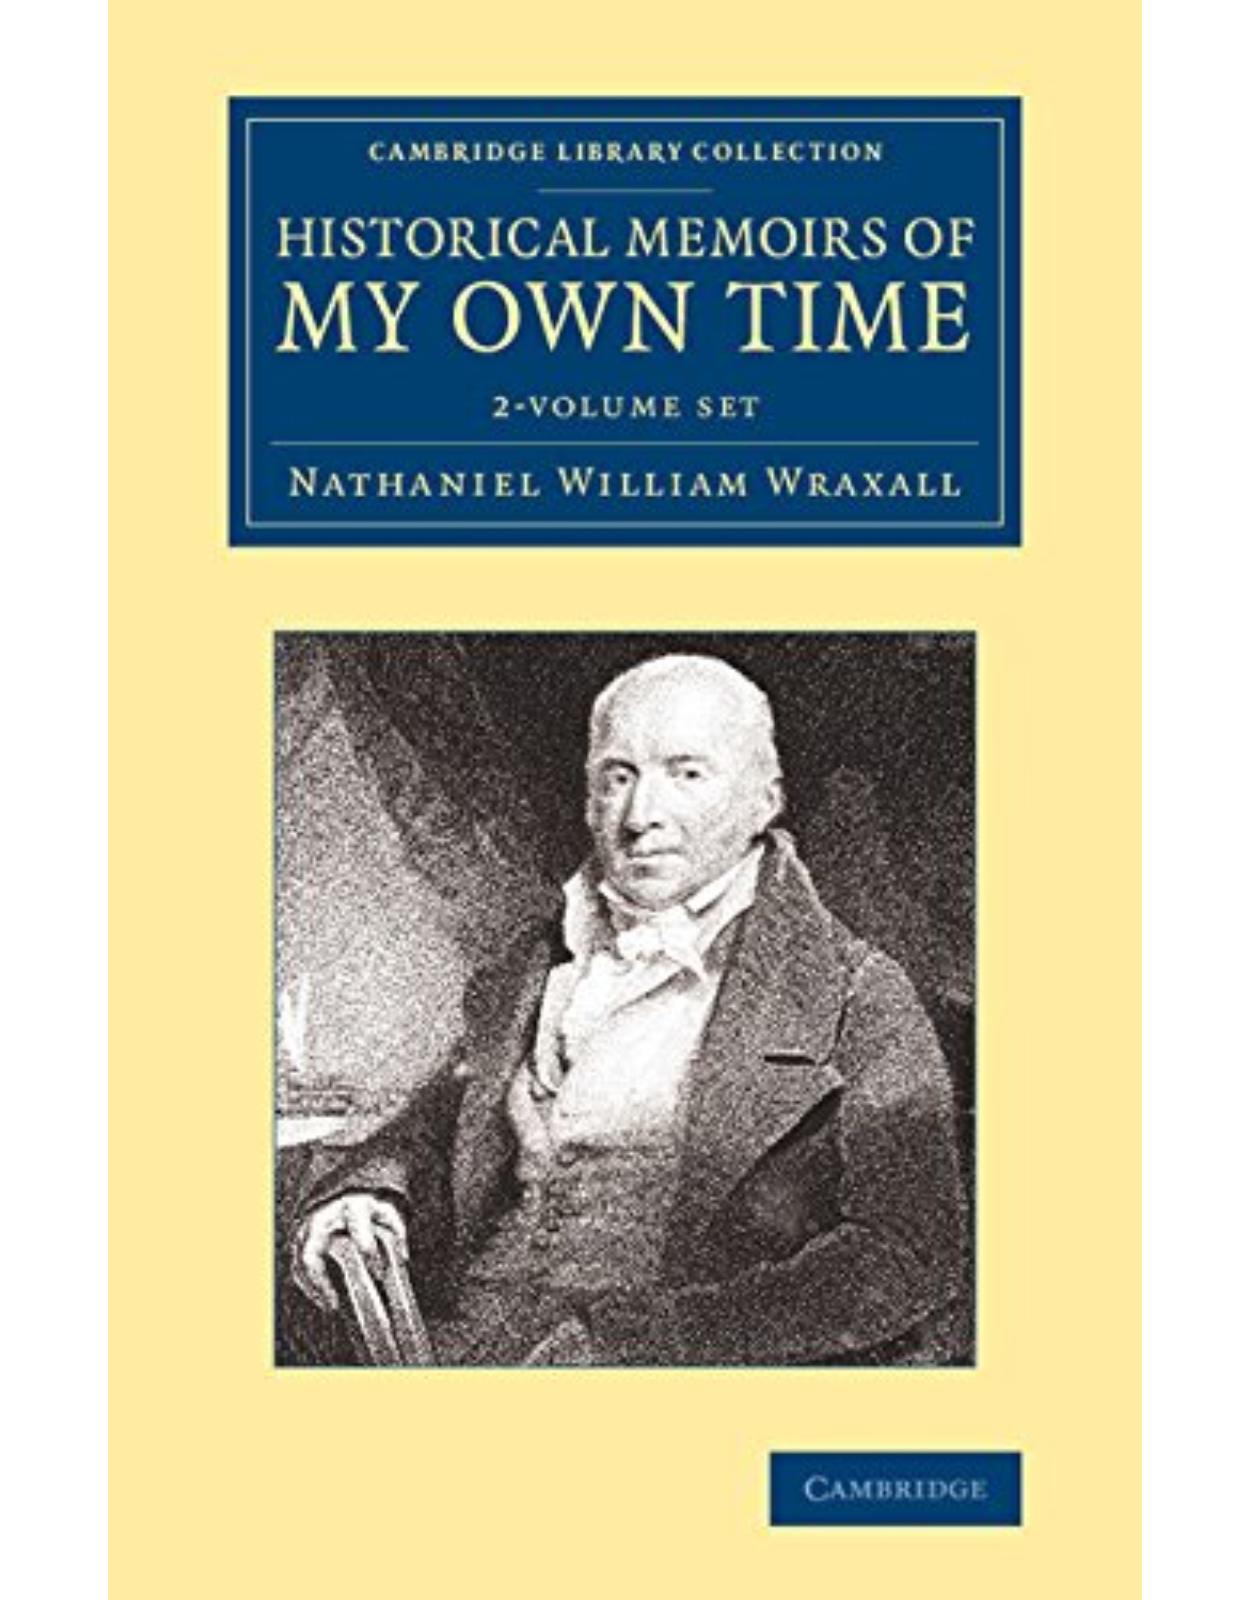 Historical Memoirs of my Own Time 2 Volume Set (Cambridge Library Collection - British & Irish History, 17th & 18th Centuries)